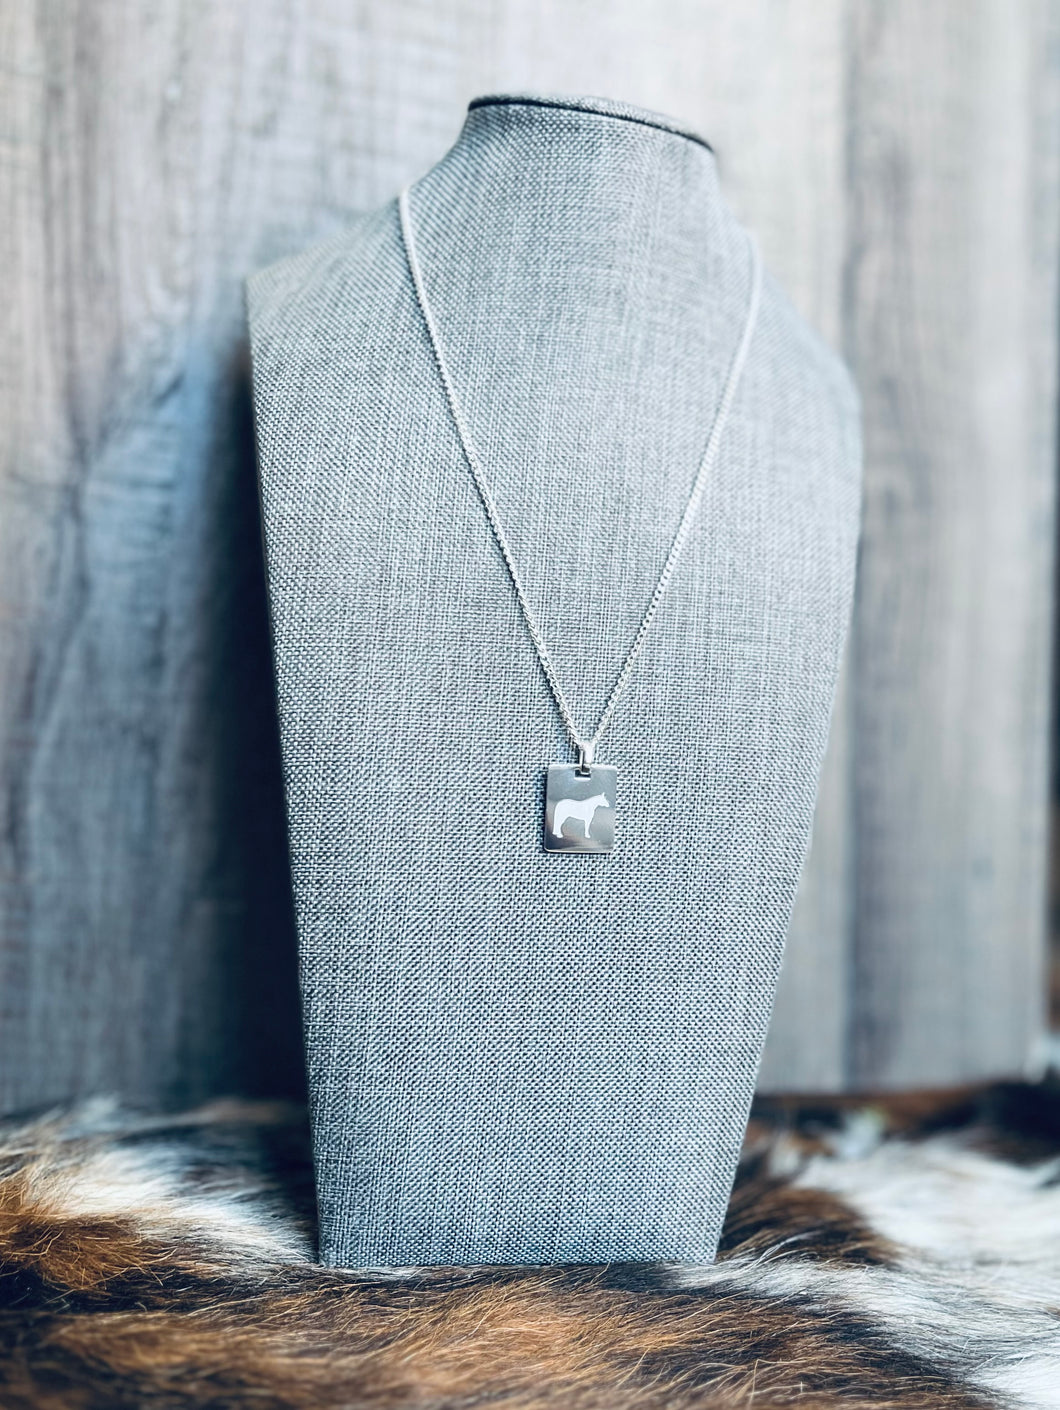 Silver Plated Horse Necklace